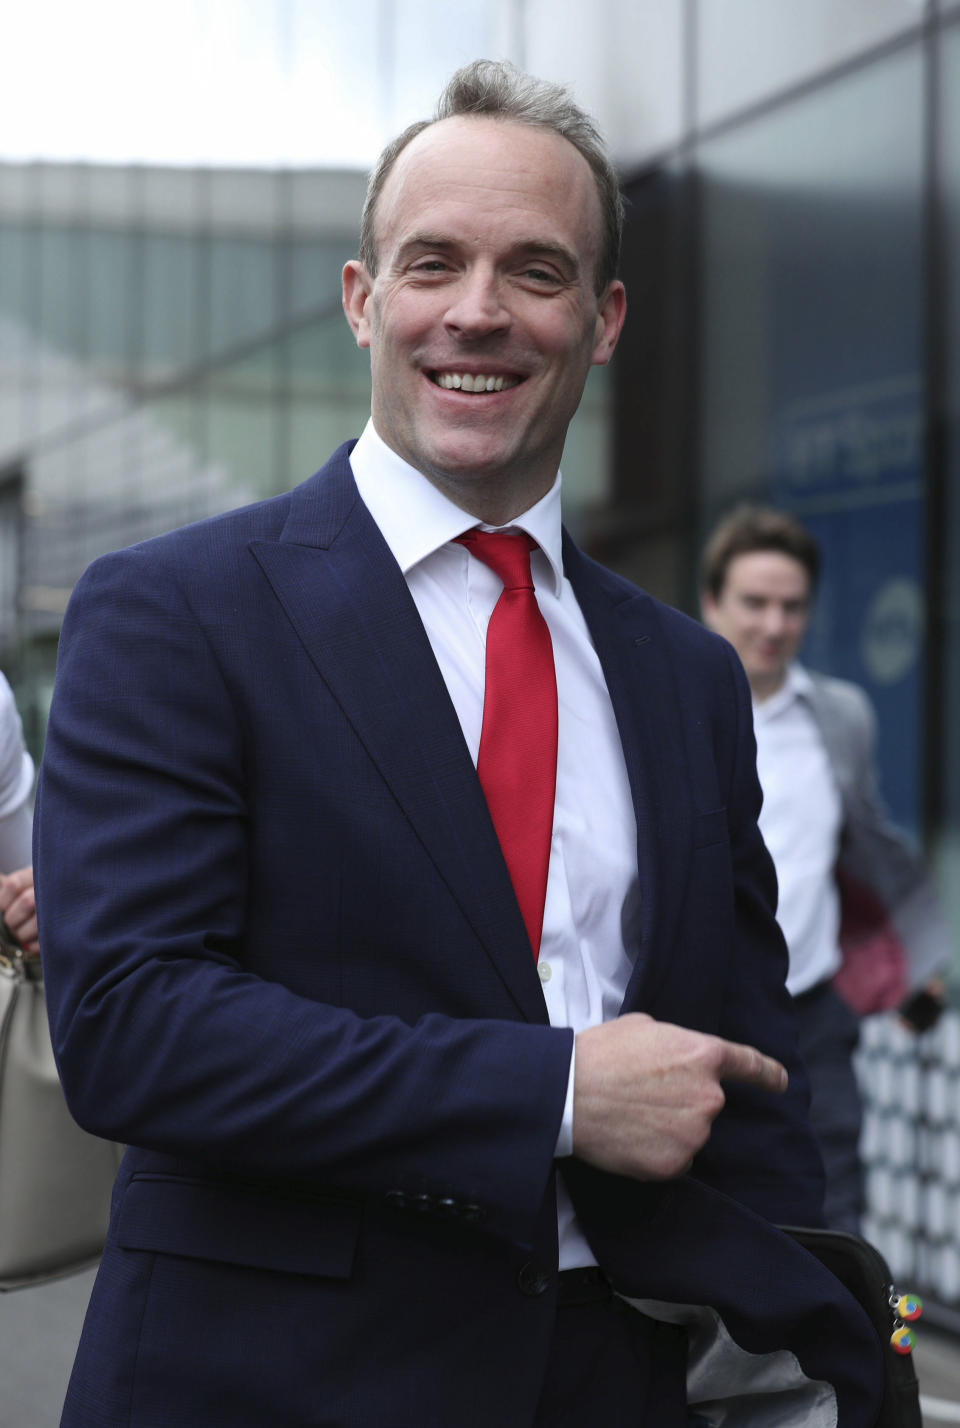 Conservative party leadership contender Dominic Raab arrives at the television studios ahead of a scheduled live television debate for the Conservative Party leadership candidates, in London, Sunday June 16, 2019. Five out of the six candidates will appear in the first TV debate, with Boris Johnson declining to take part, although other candidates accuse him of trying to avoid scrutiny. (Yui Mok/PA via AP)